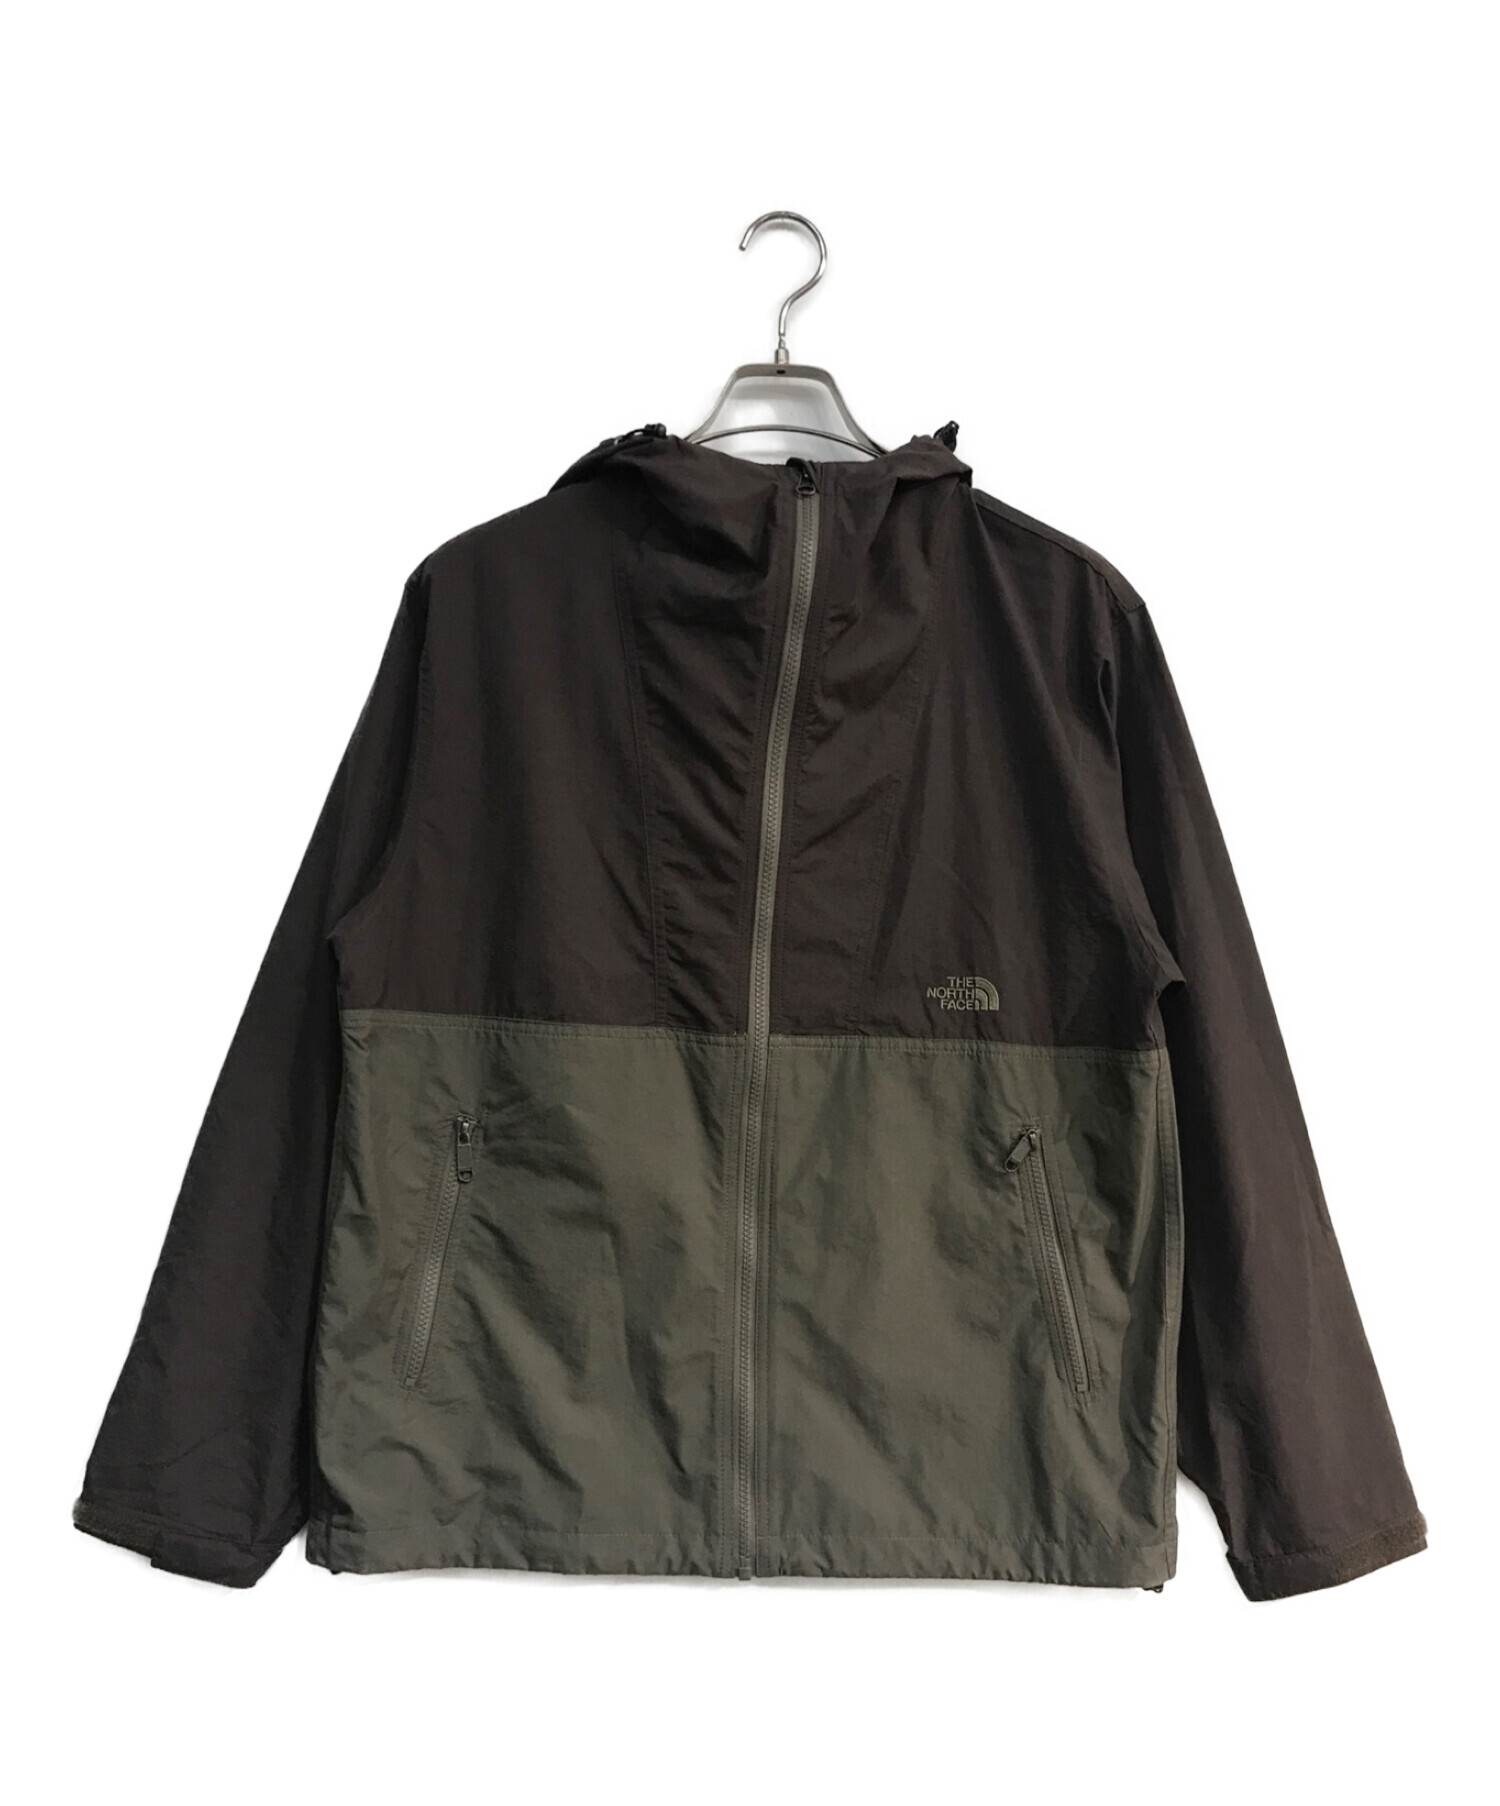 THE NORTH FACE マウンテン コンパクトジャケット NP21230